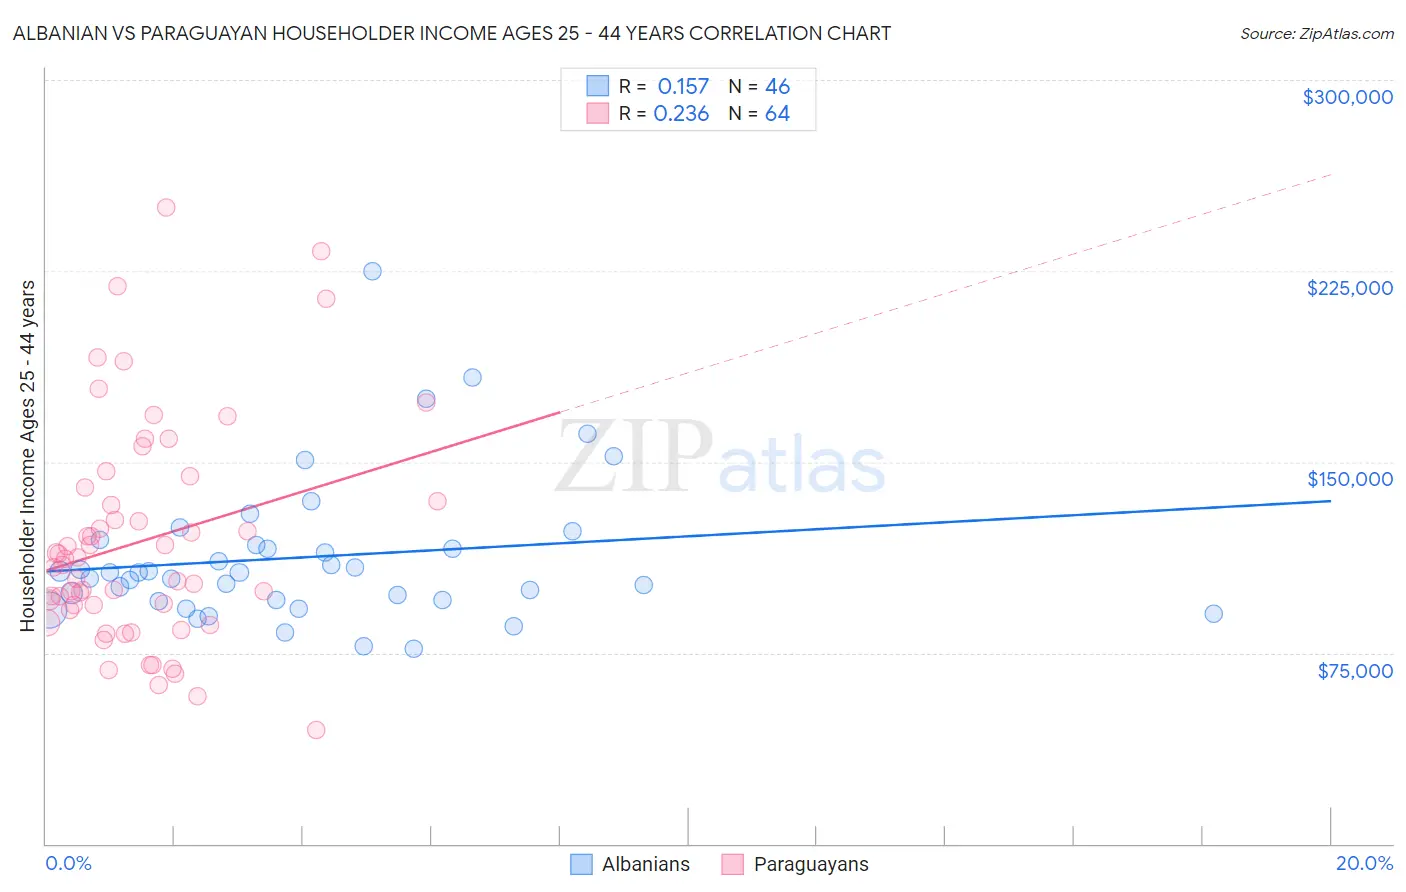 Albanian vs Paraguayan Householder Income Ages 25 - 44 years